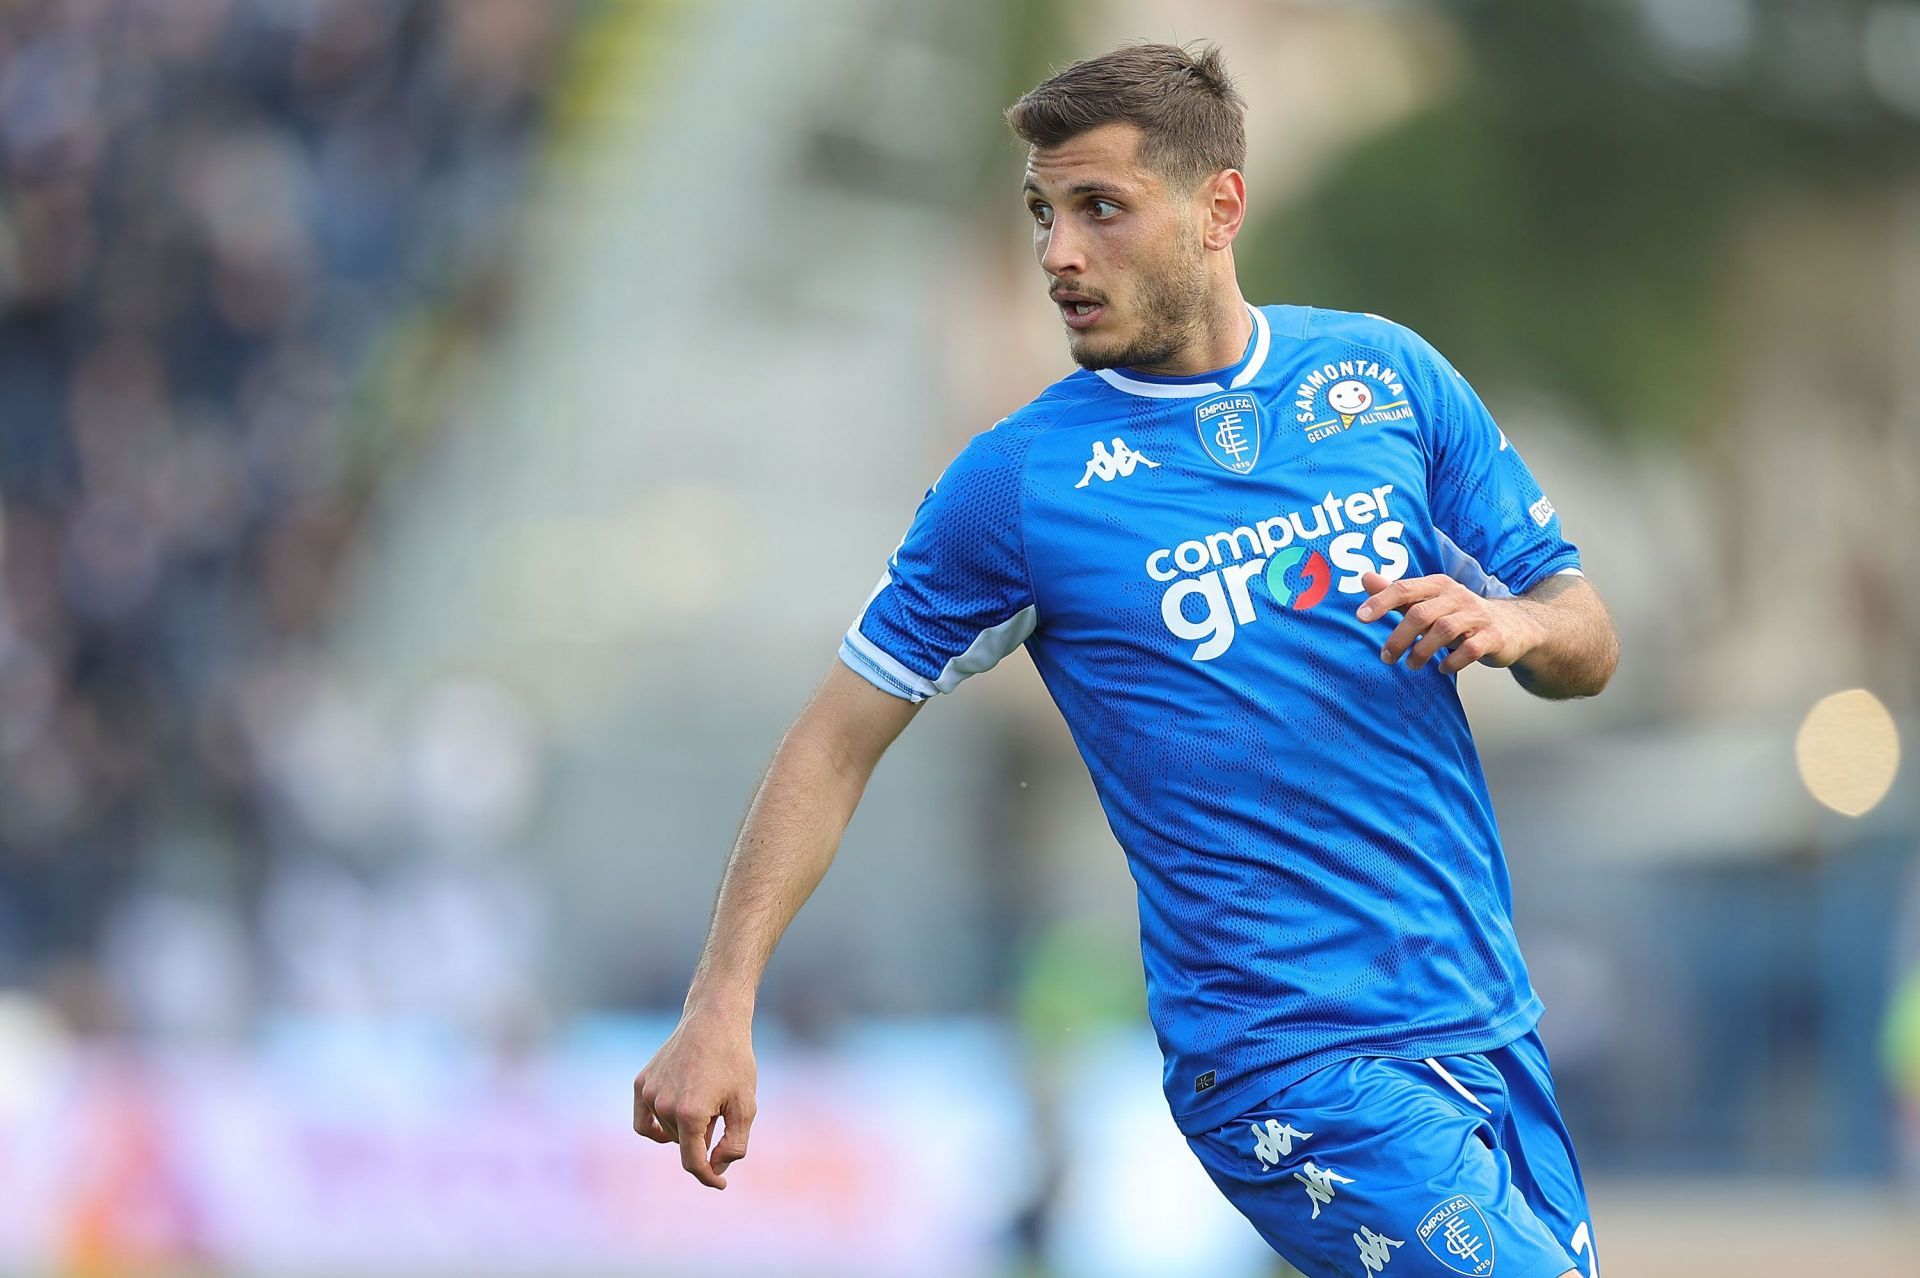 Bandinelli will be a huge miss for Empoli